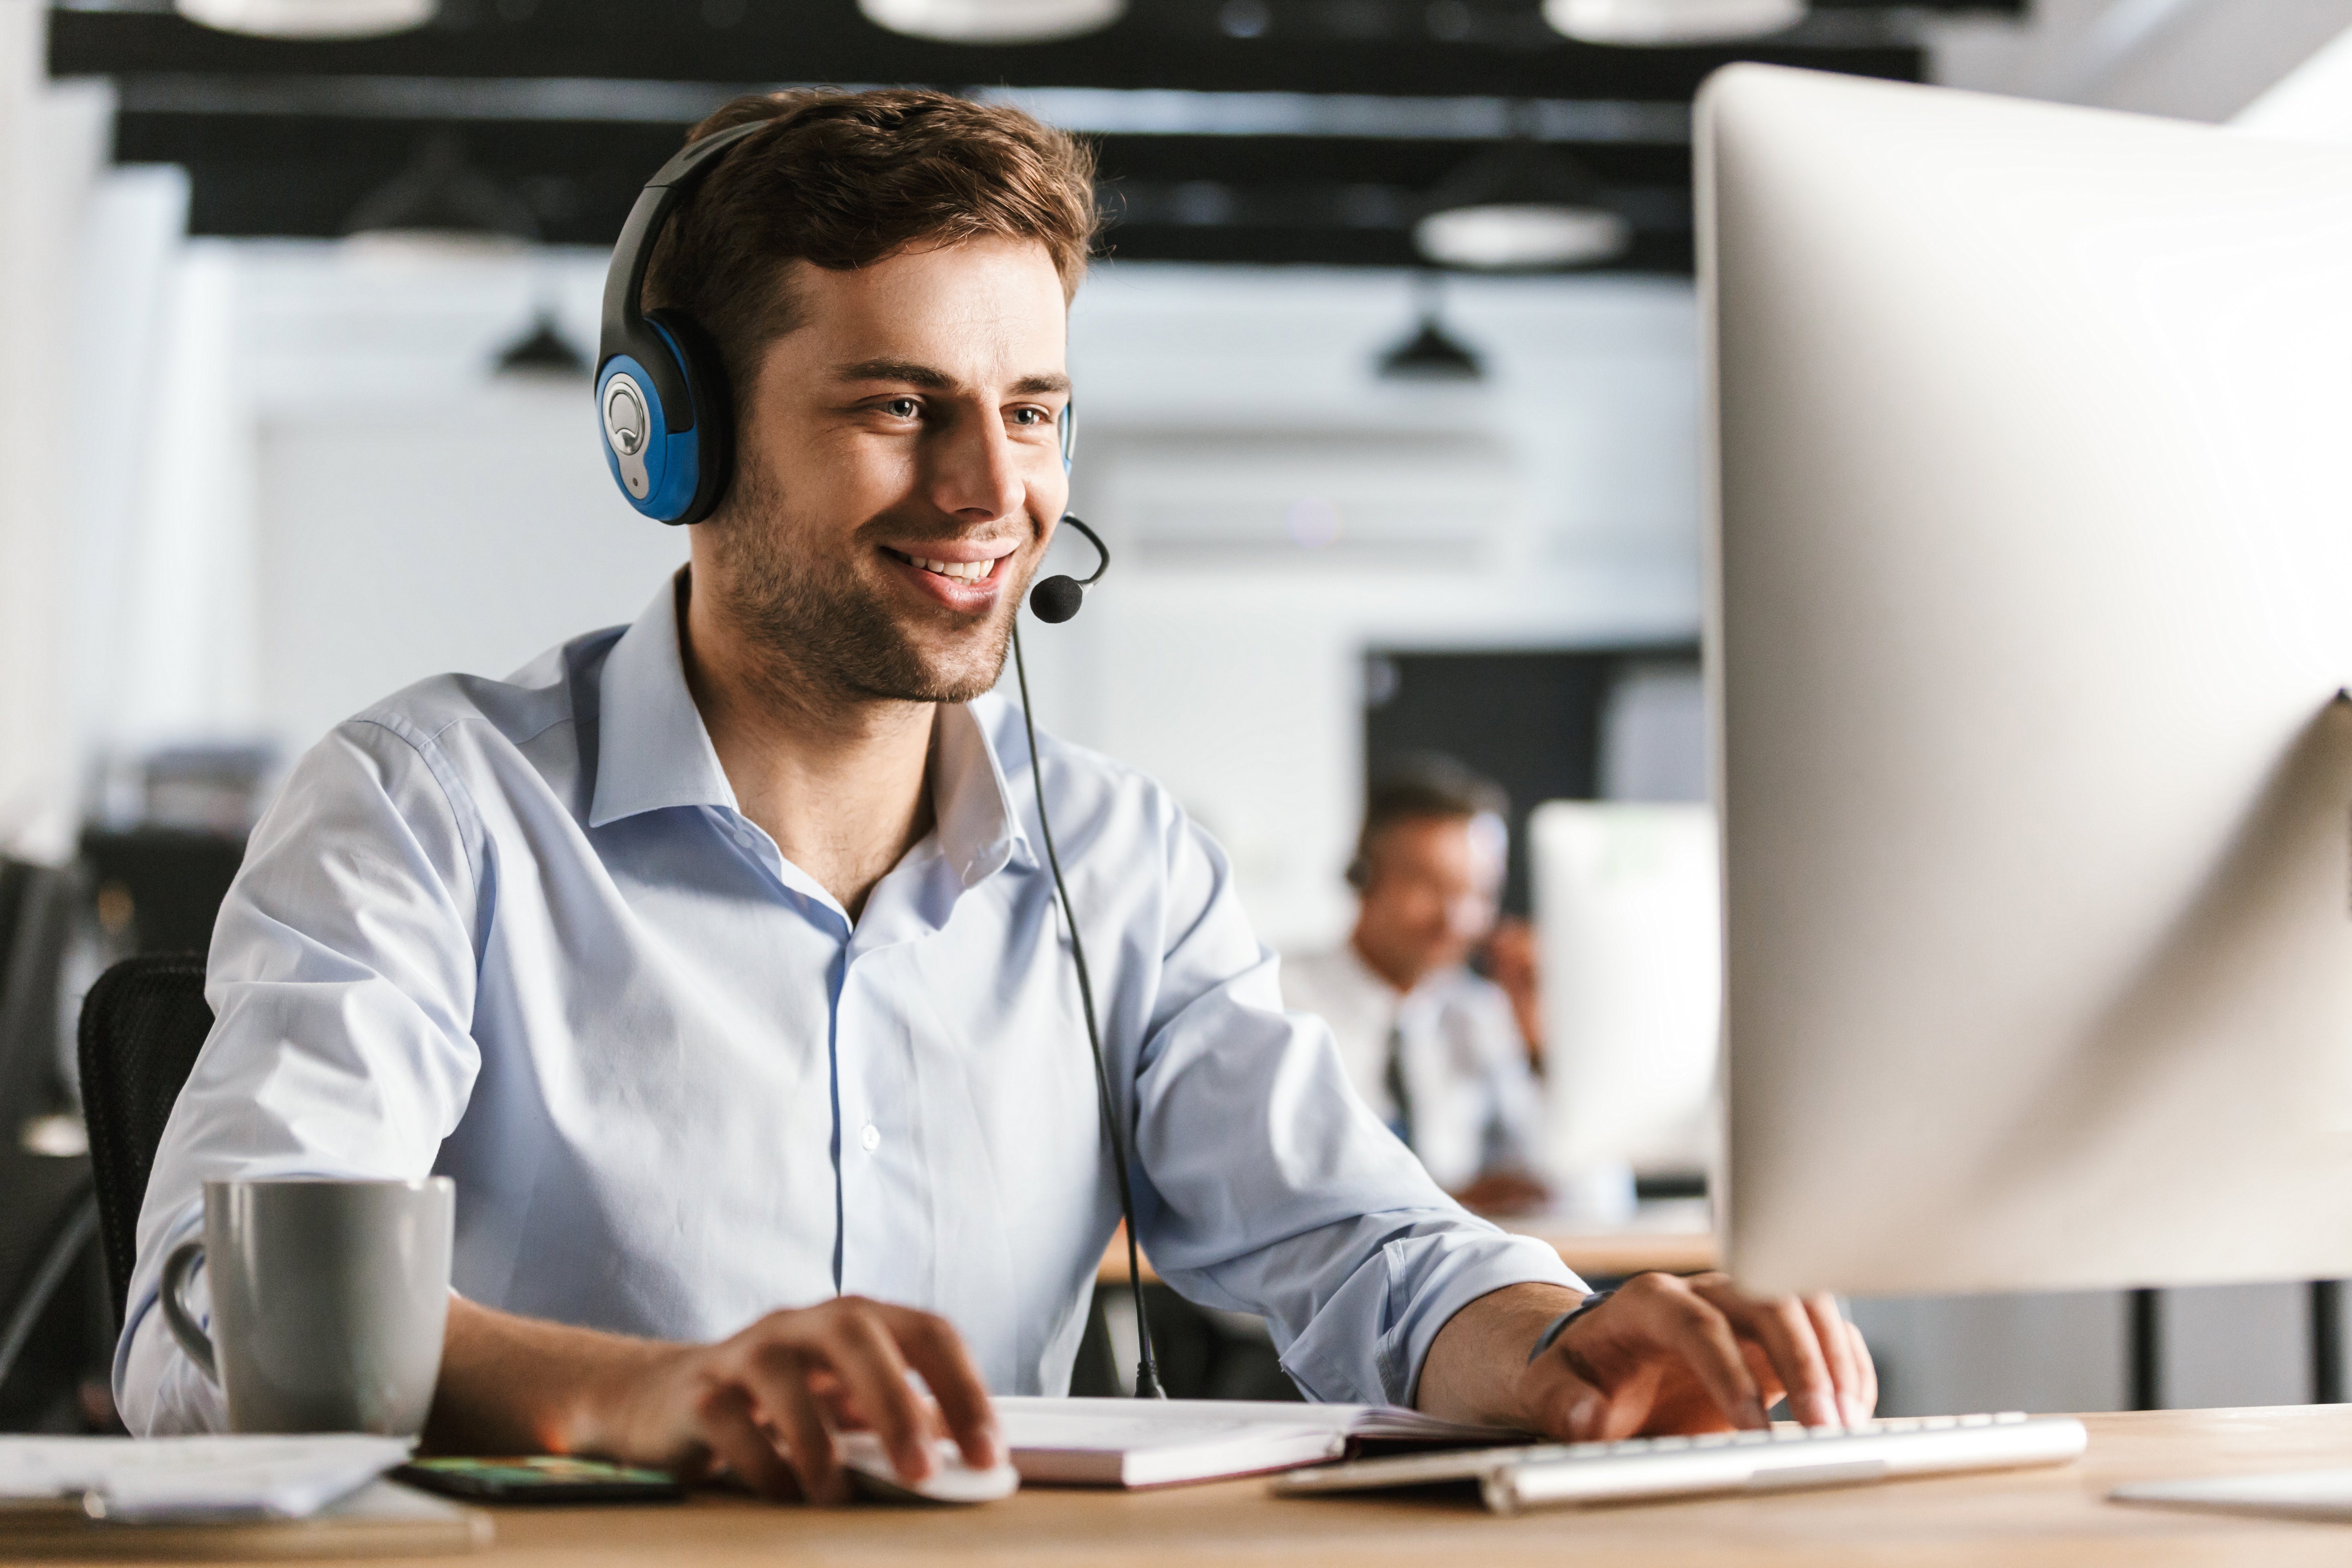 photo-young-worker-man-20s-wearing-office-clothes-headset-smiling-talking-with-clients-call-center.jpg__PID:53dd6a72-1036-4ab3-9bd8-51389700a1a1